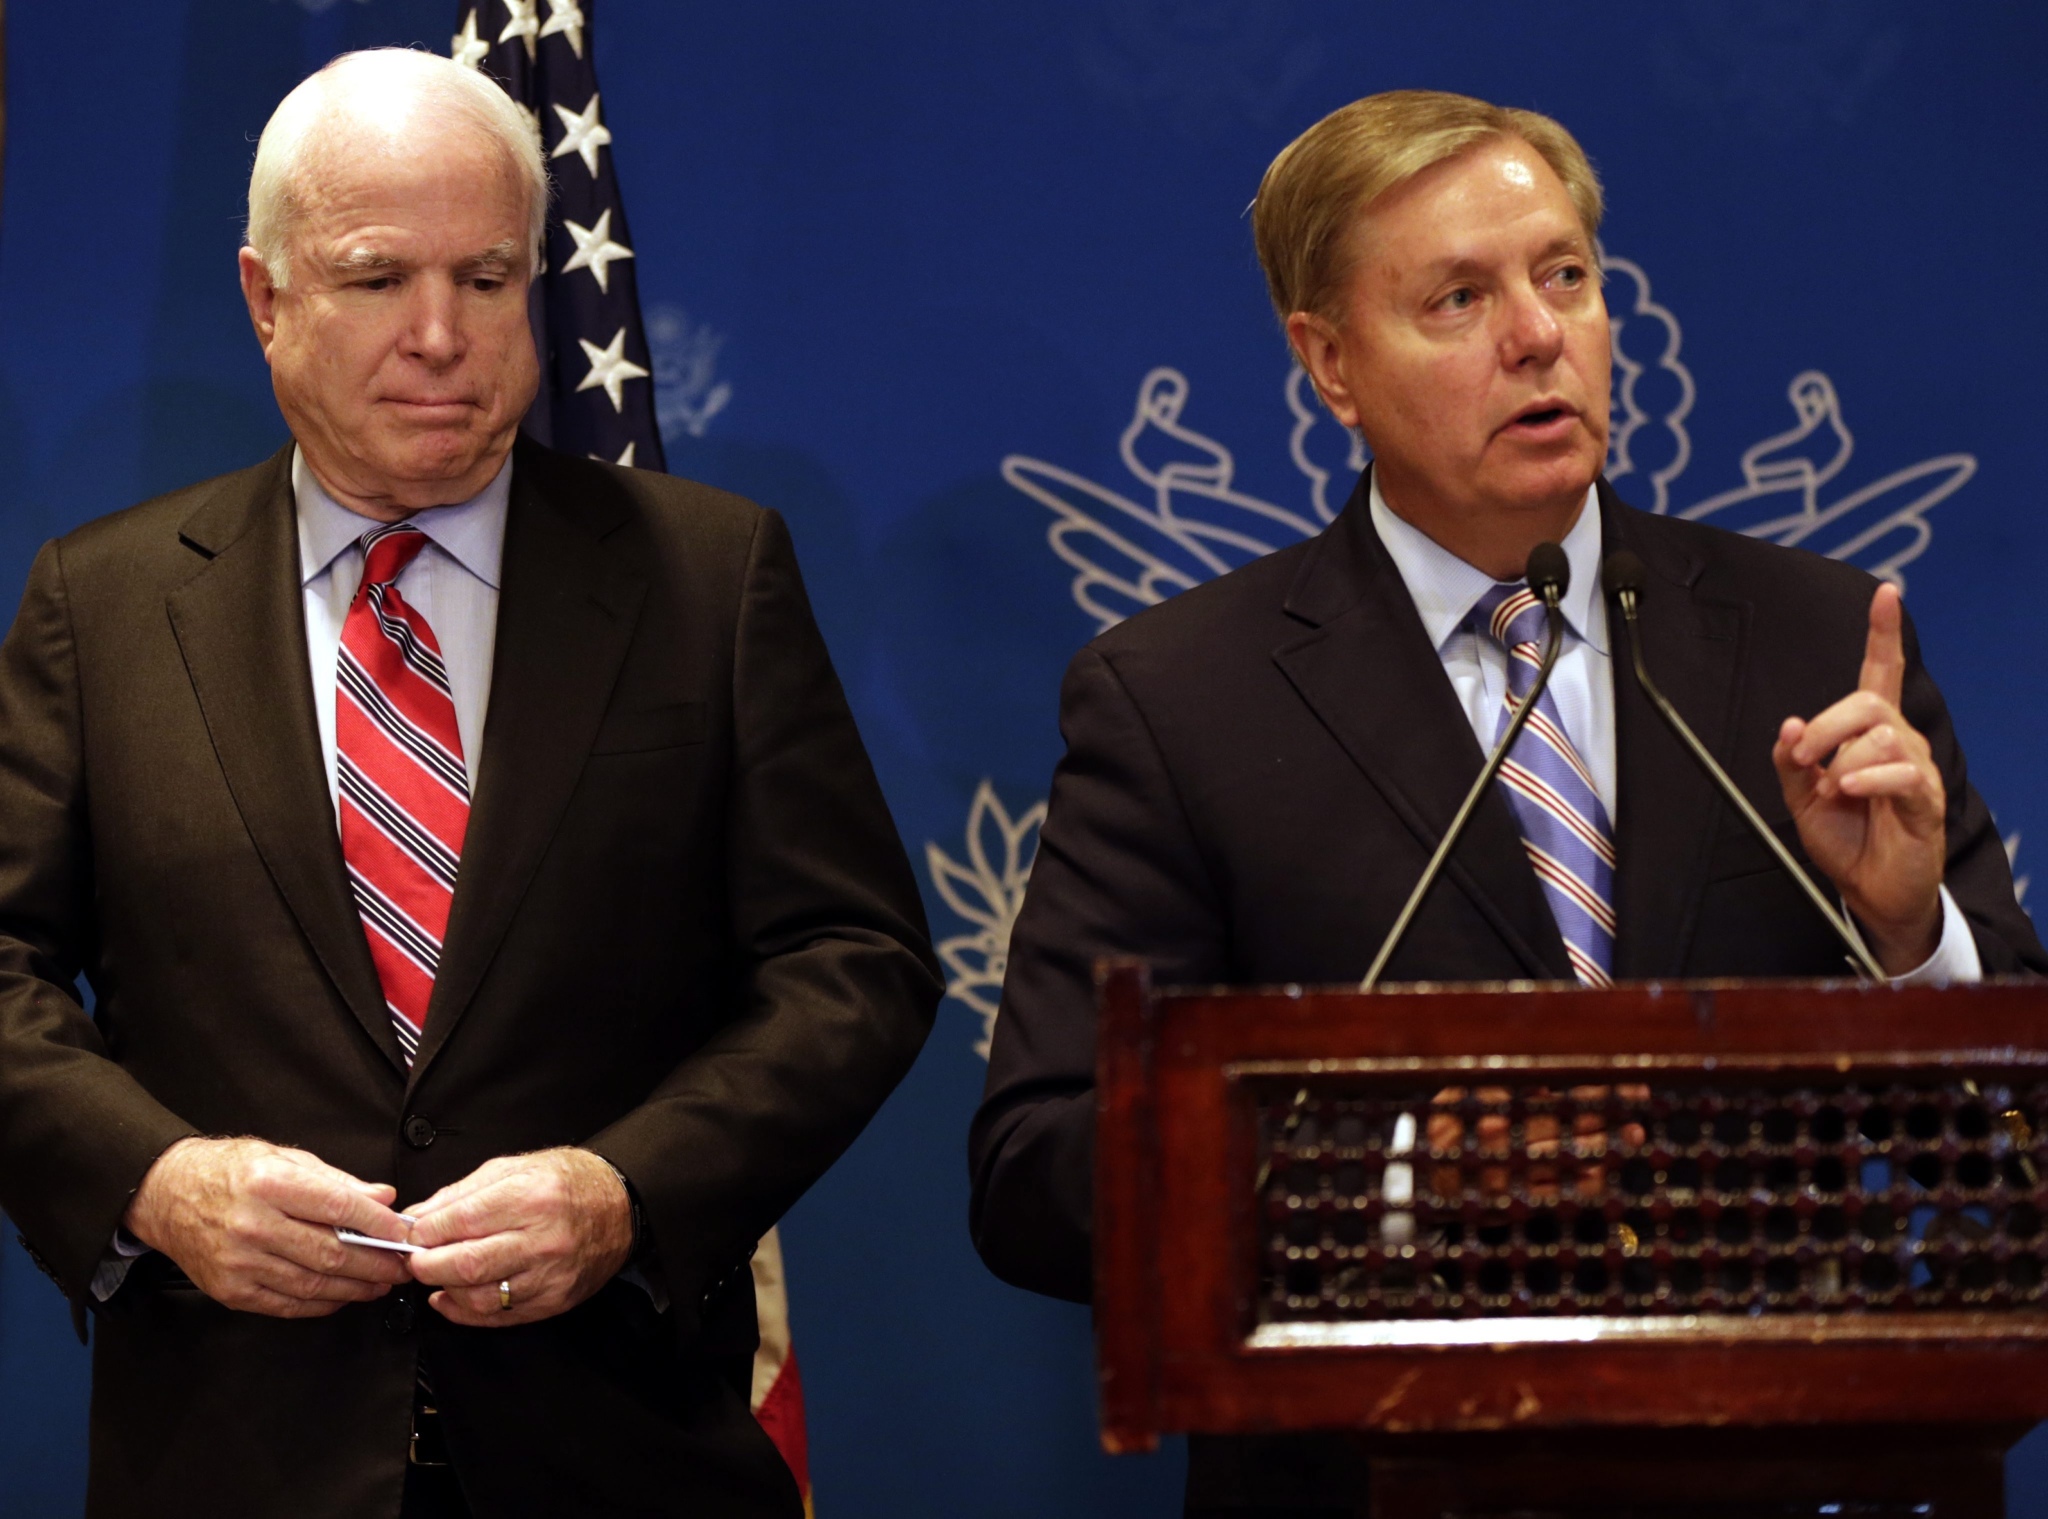 US Senators John McCain (left) and Lindsey Graham (right) address a joint press conference in Cairo, Egypt. Photo: AFP